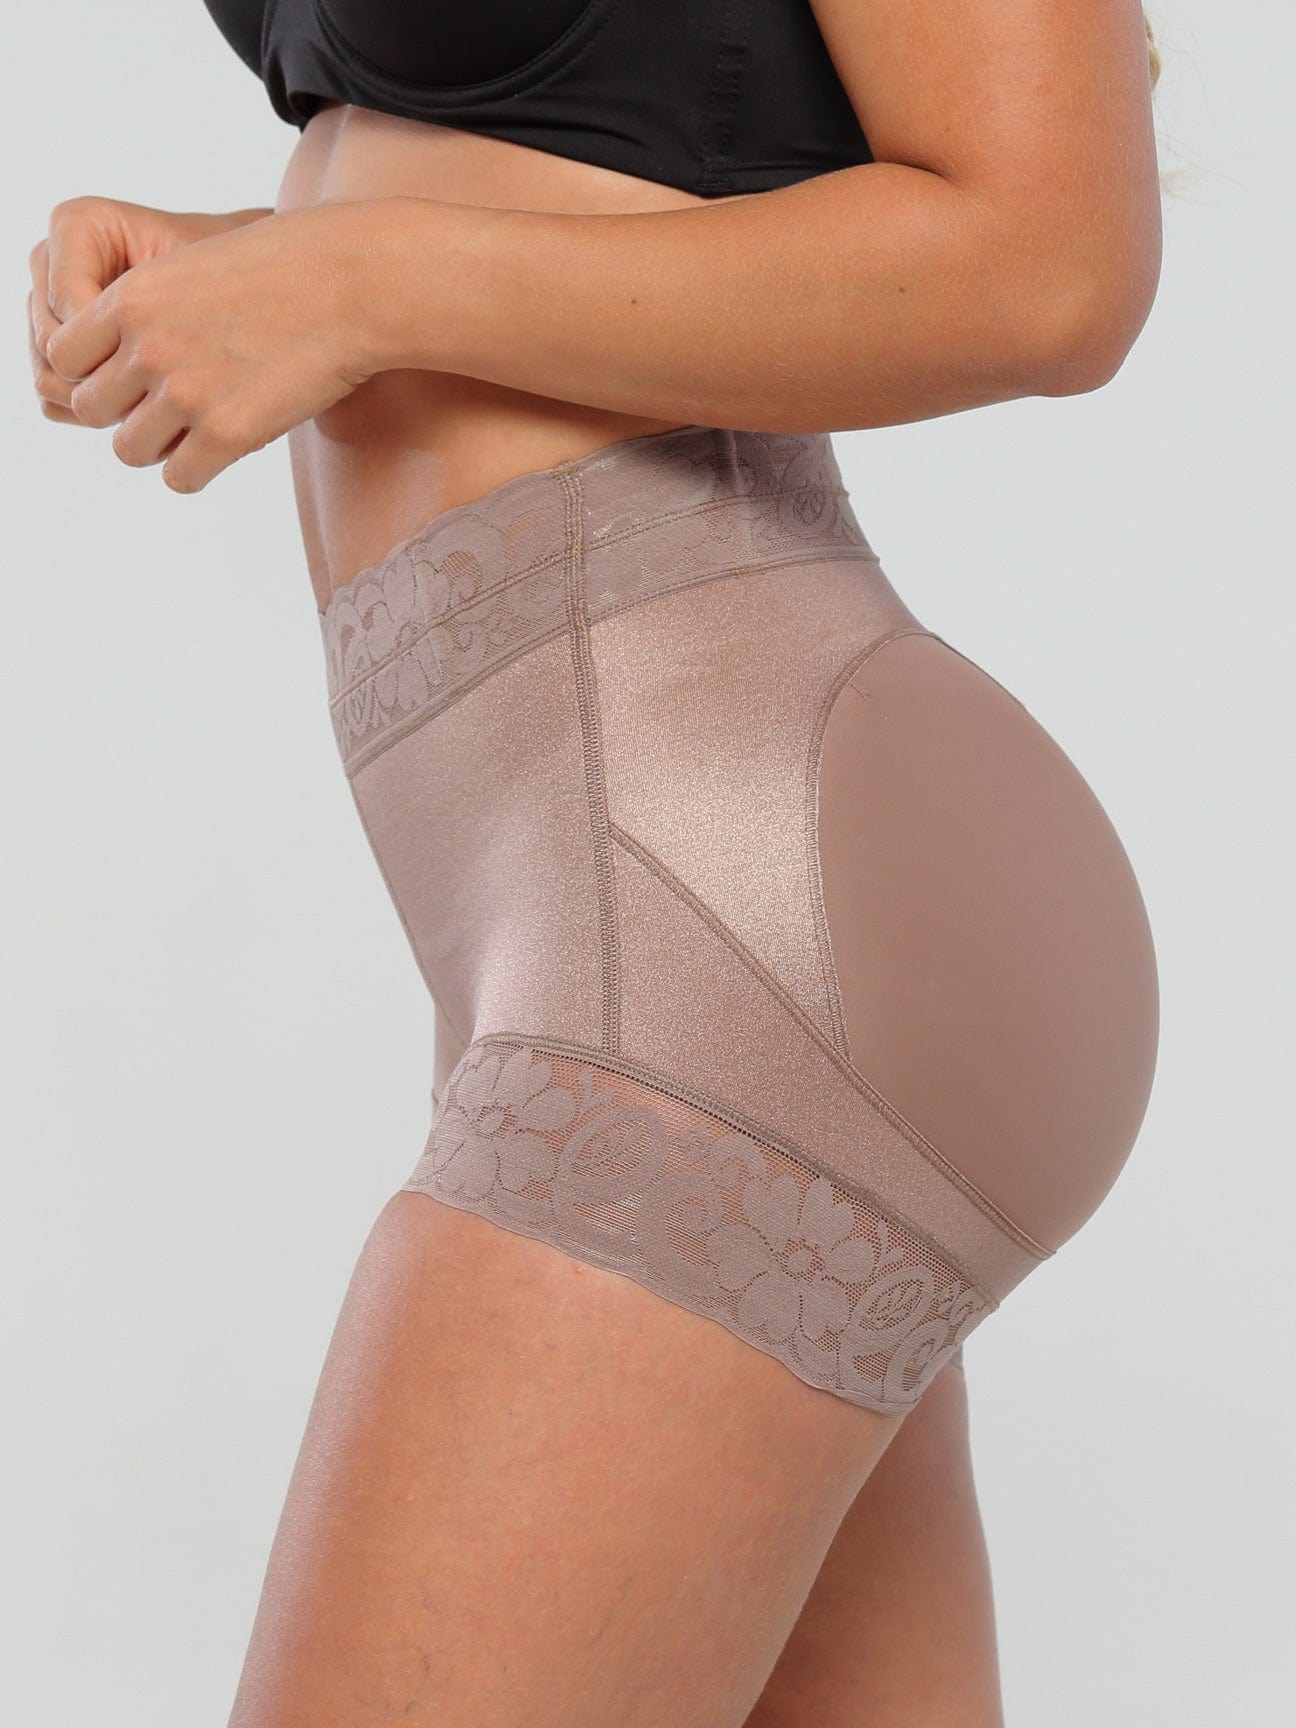 Butt Lifter Padded Control Panties in Nairobi Central - Clothing